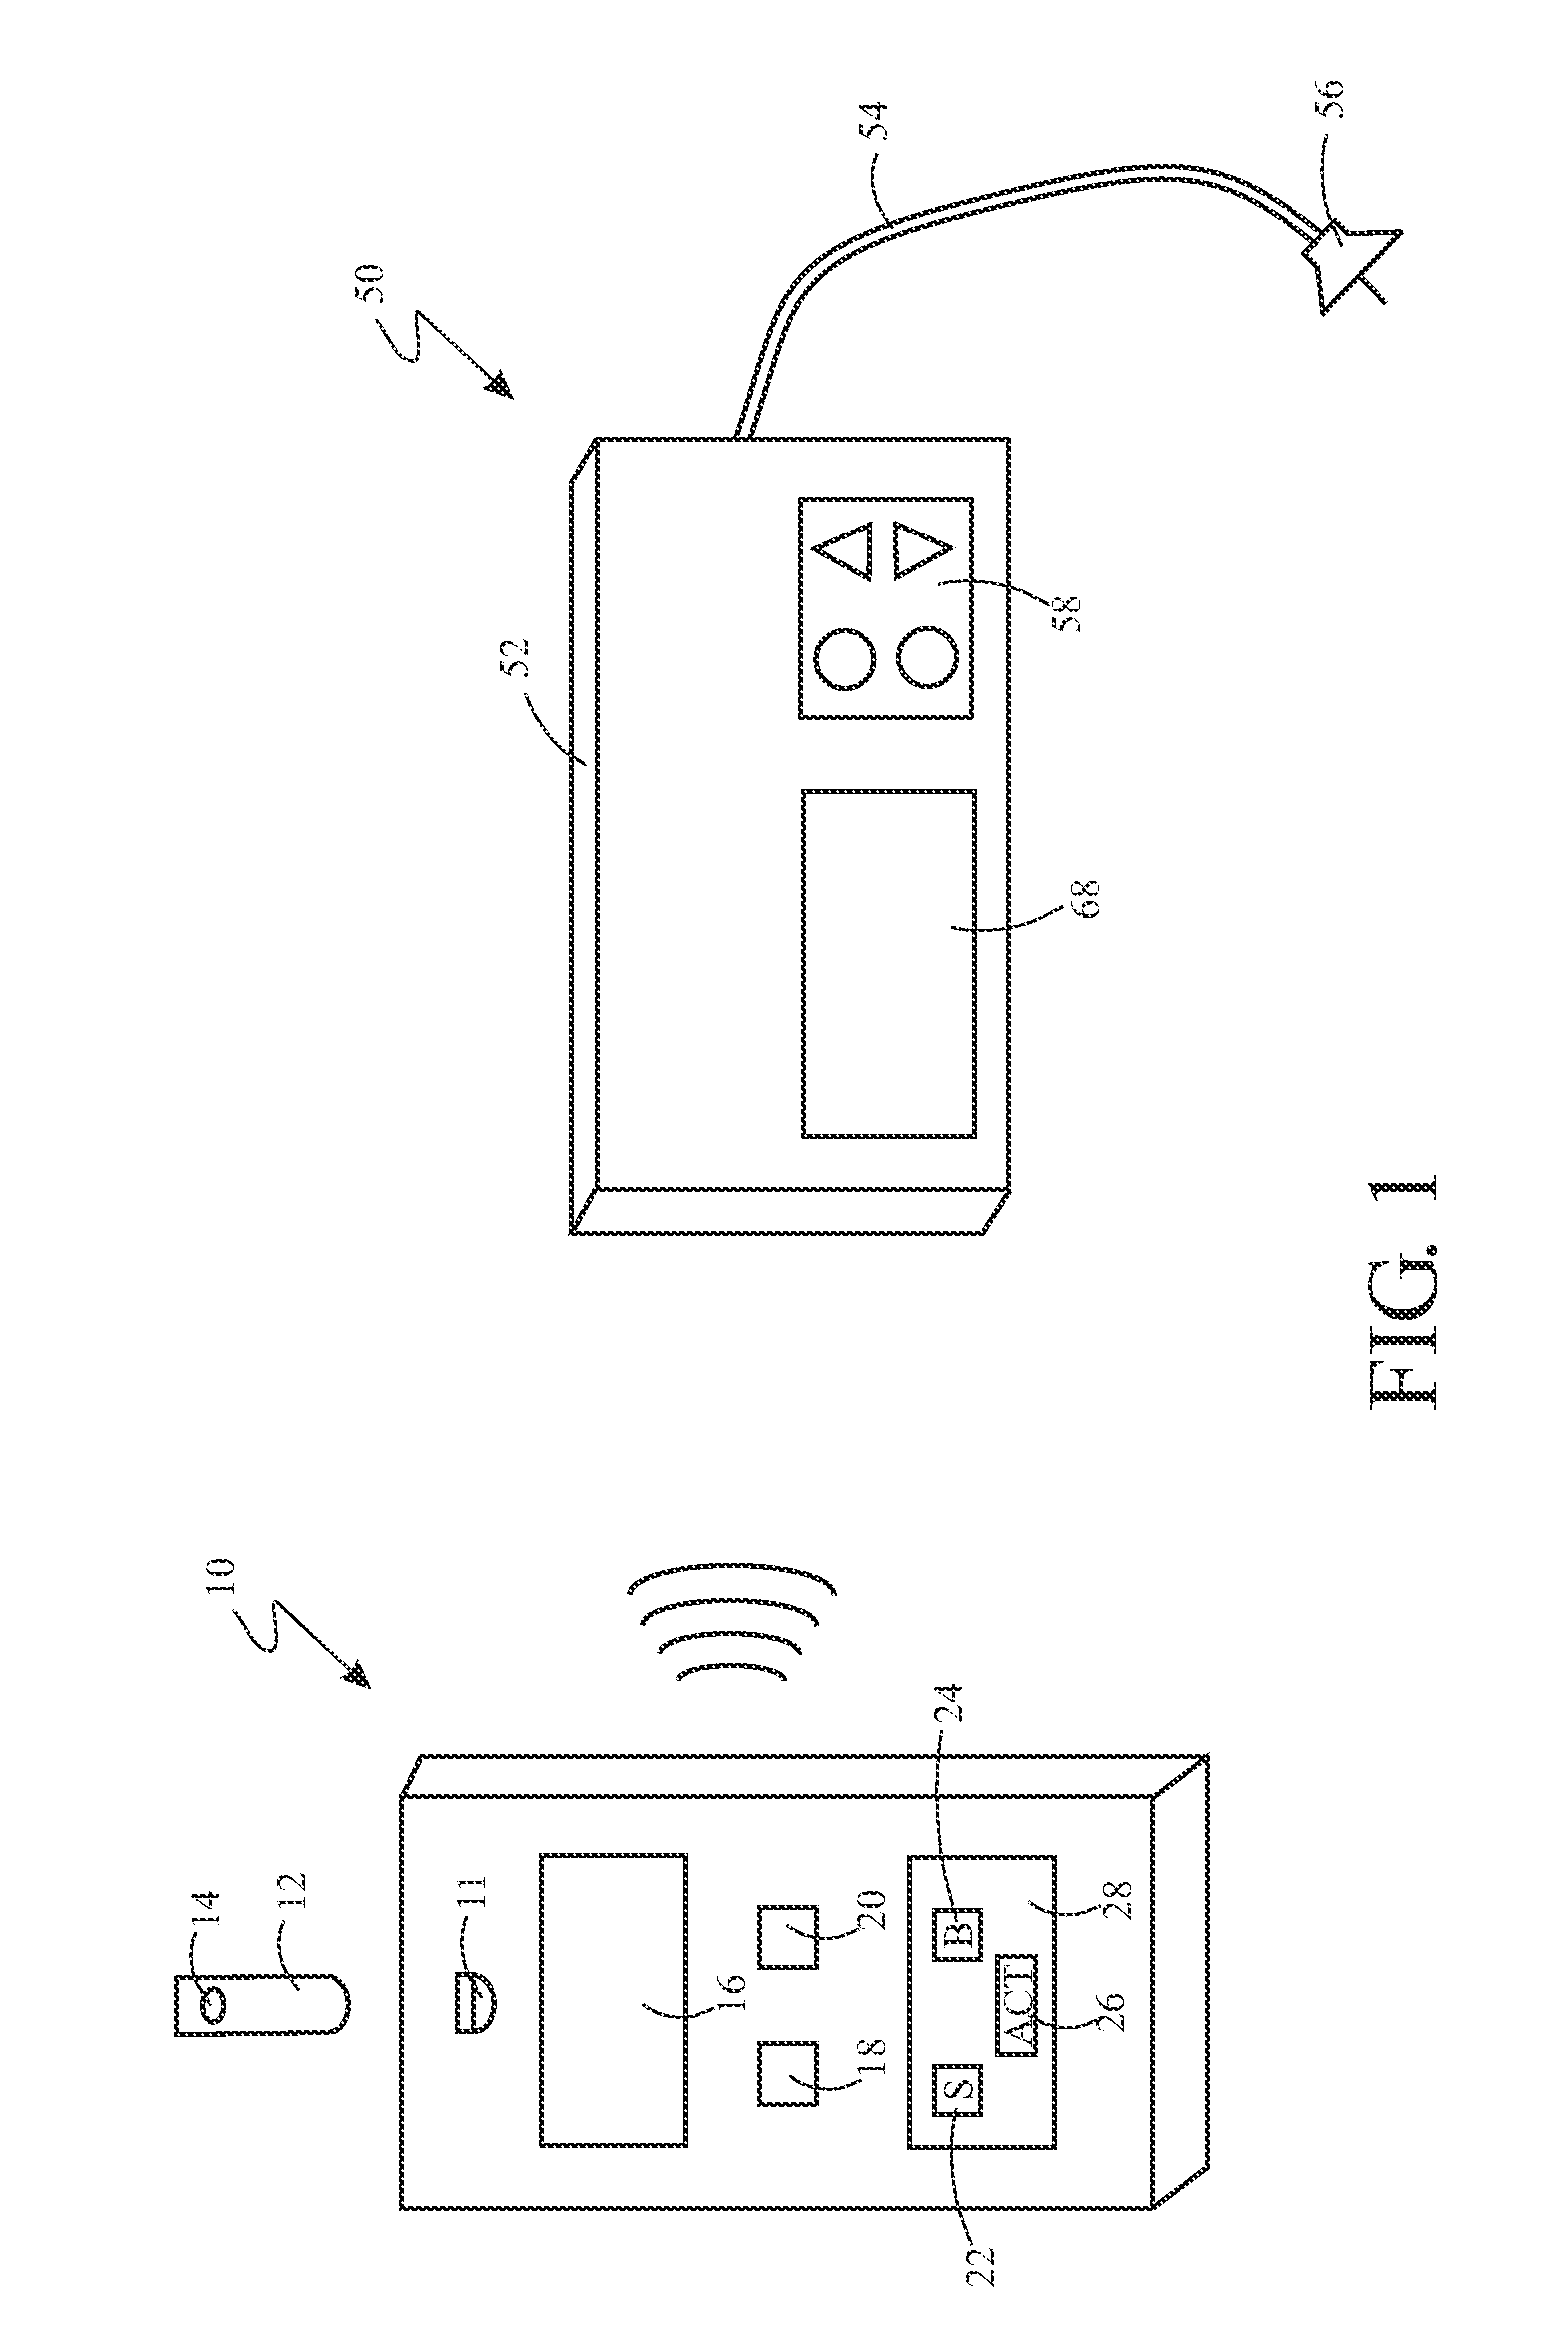 Physiological monitoring device for controlling a medication infusion device